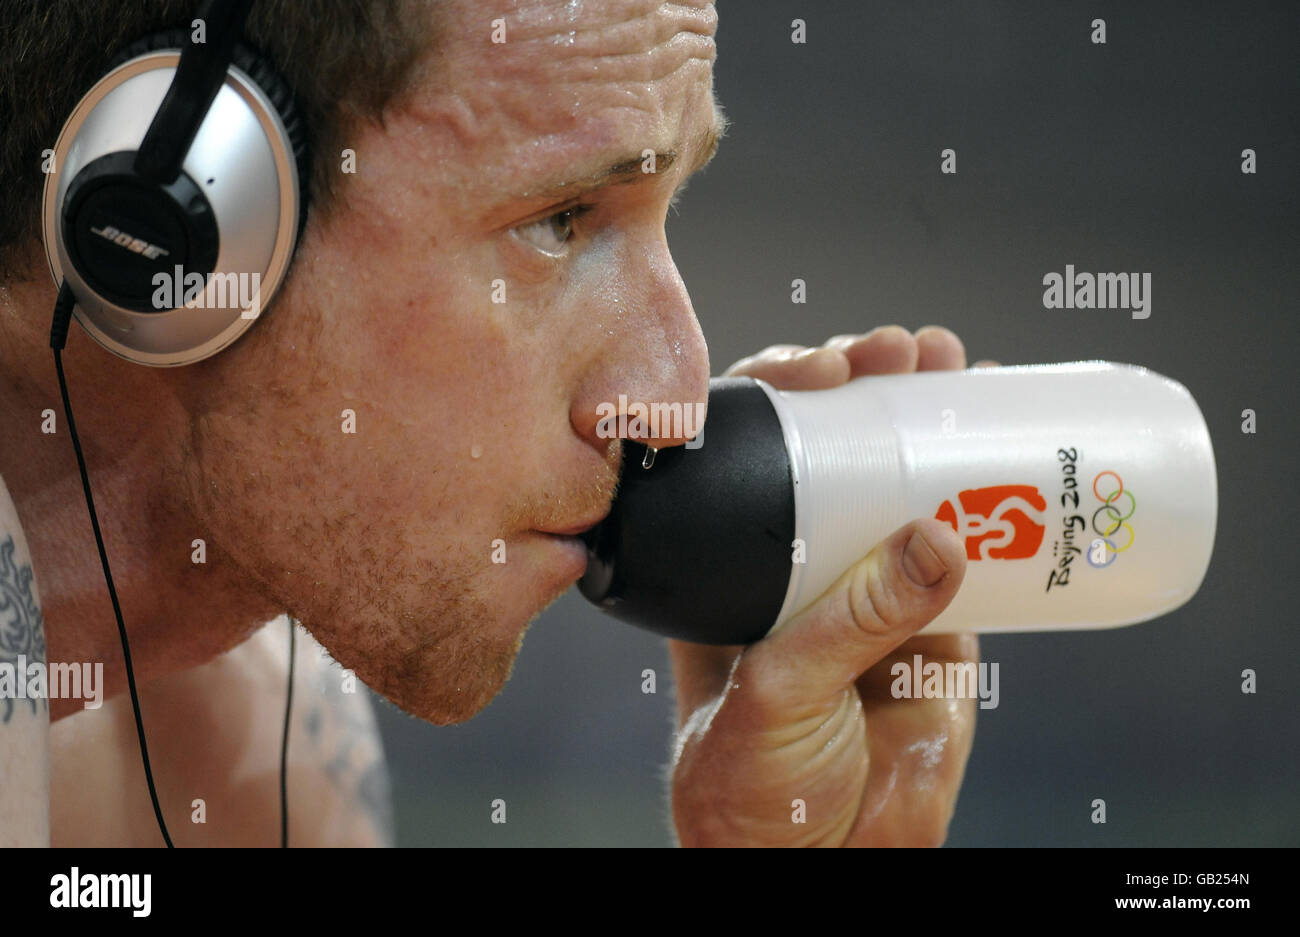 Olympics - Beijing Olympic Games 2008. Great Britain's Bradley Wiggins takes a drink during a training session at the Laoshan Velodrome in Beijing, China. Stock Photo